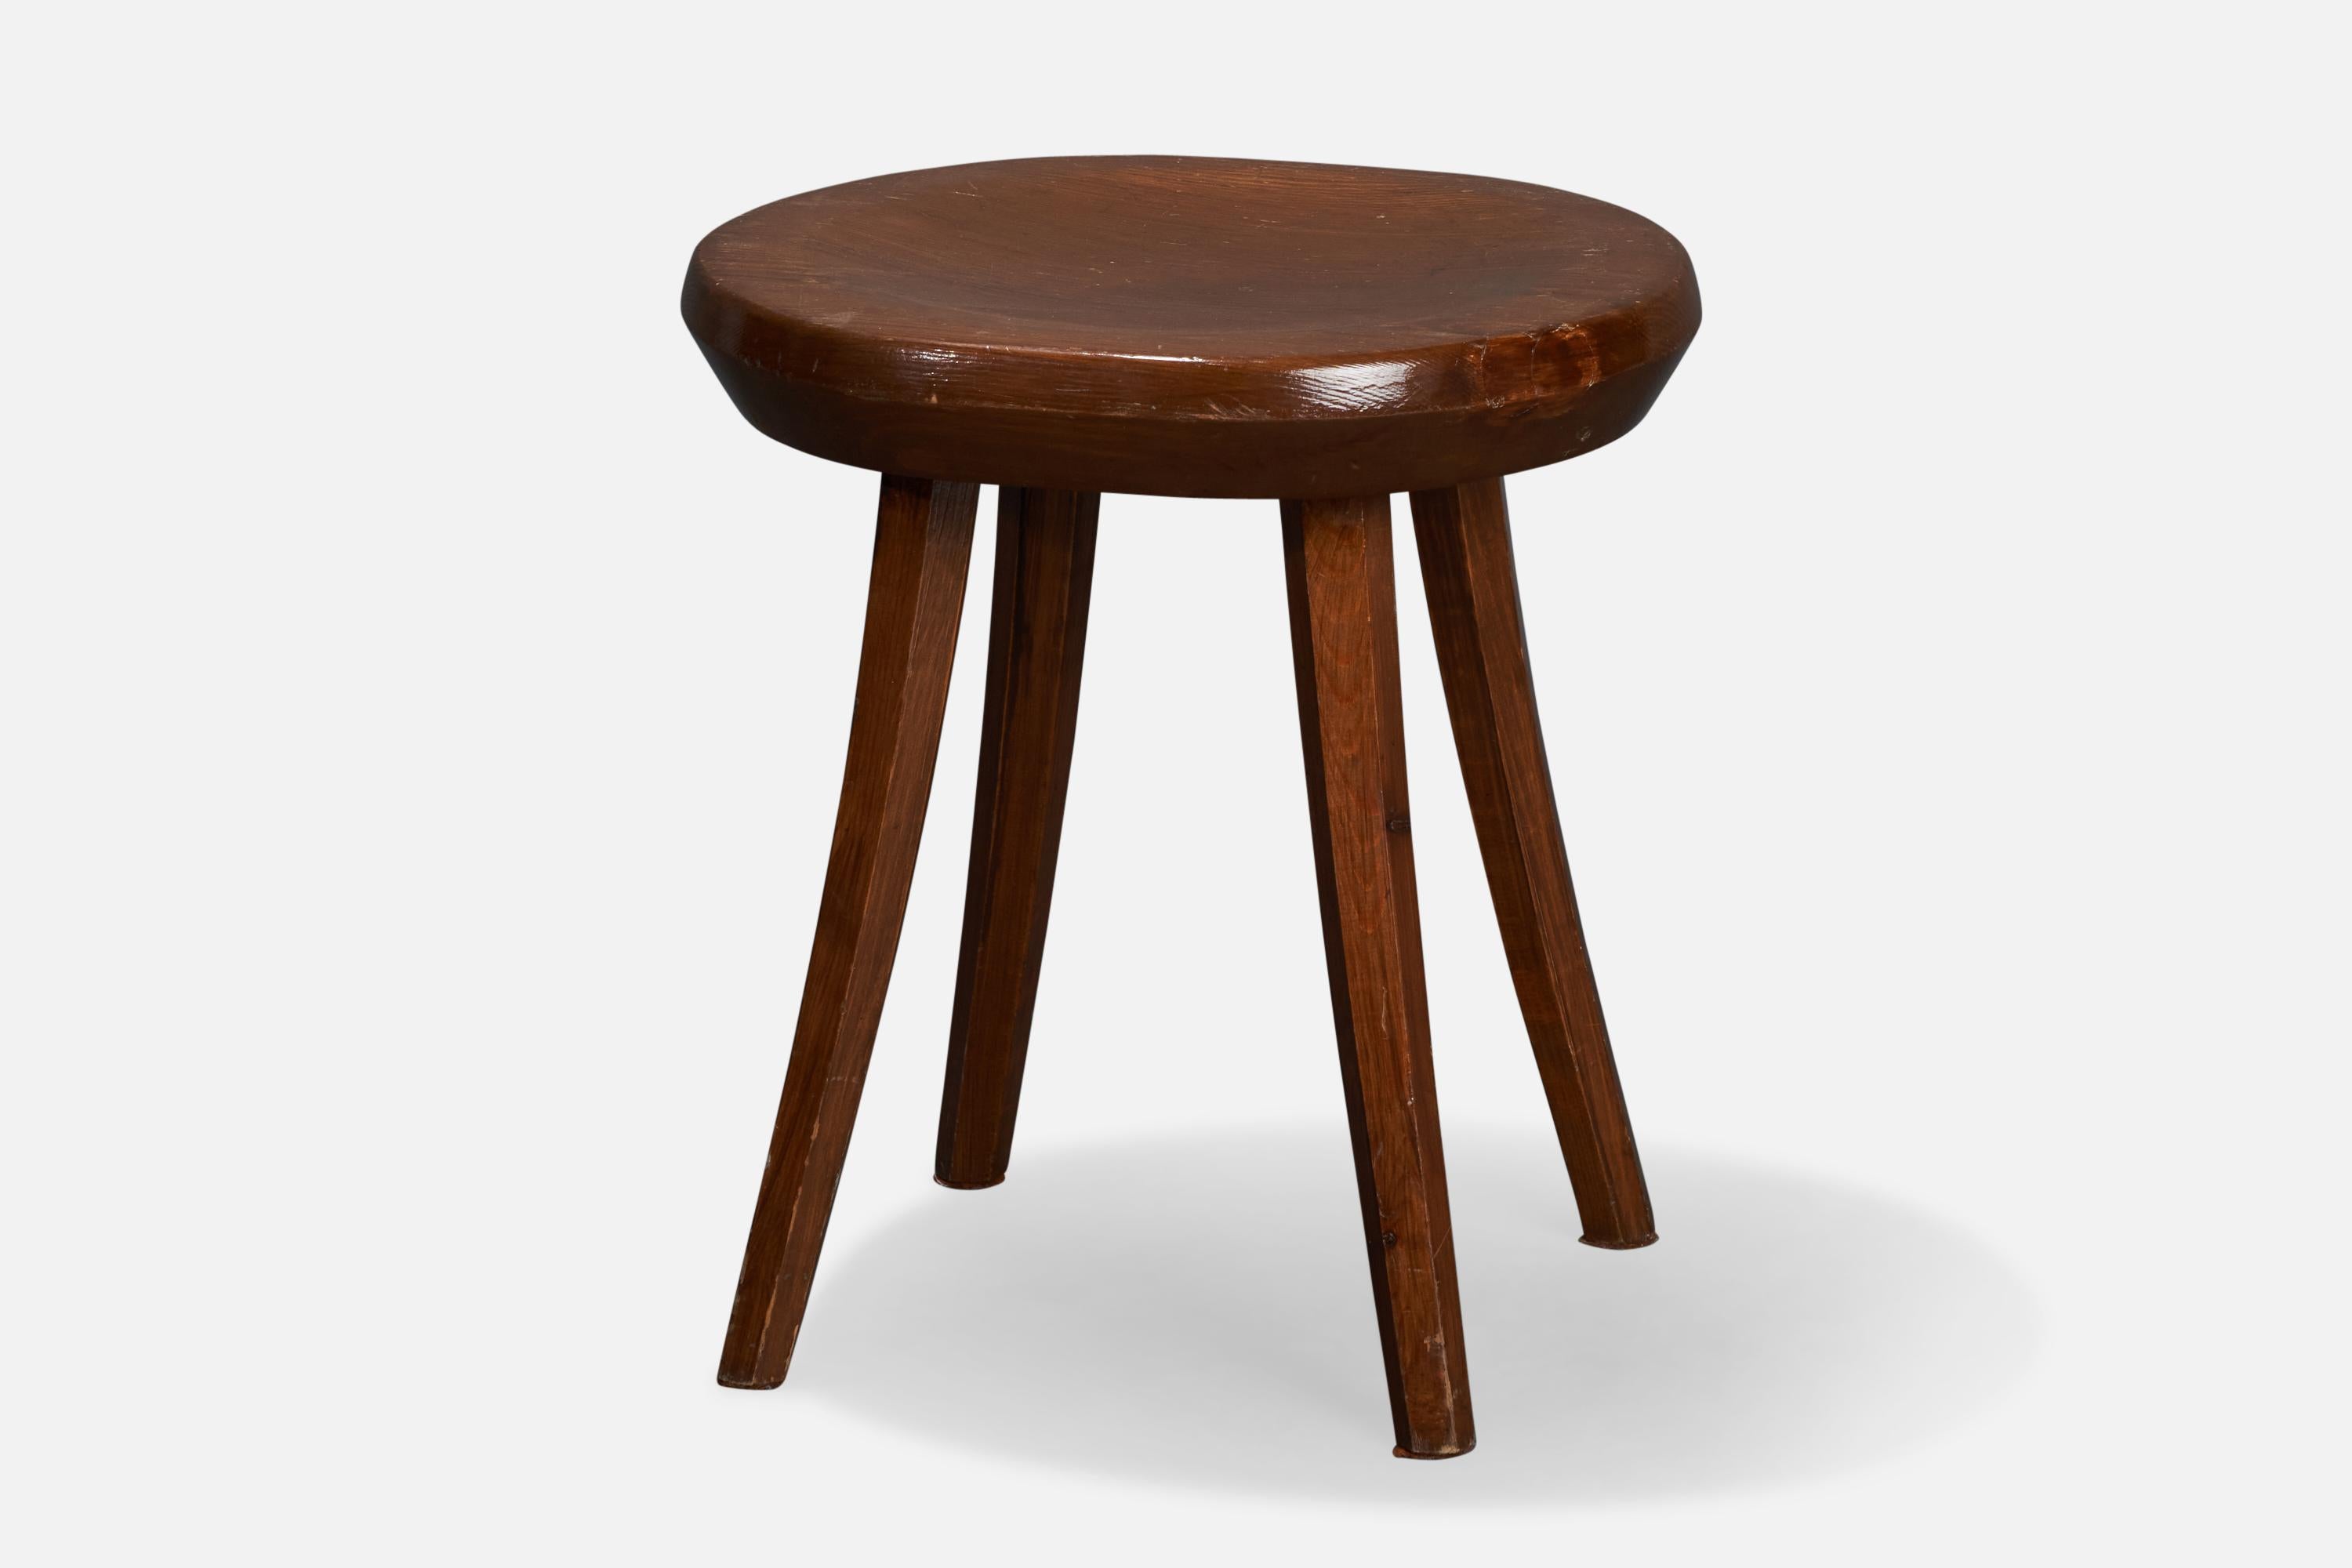 A stained pine stool designed and produced by Tervasaaren Puutyötehdas, Finland, 1960s.

Seat height: 16.08”